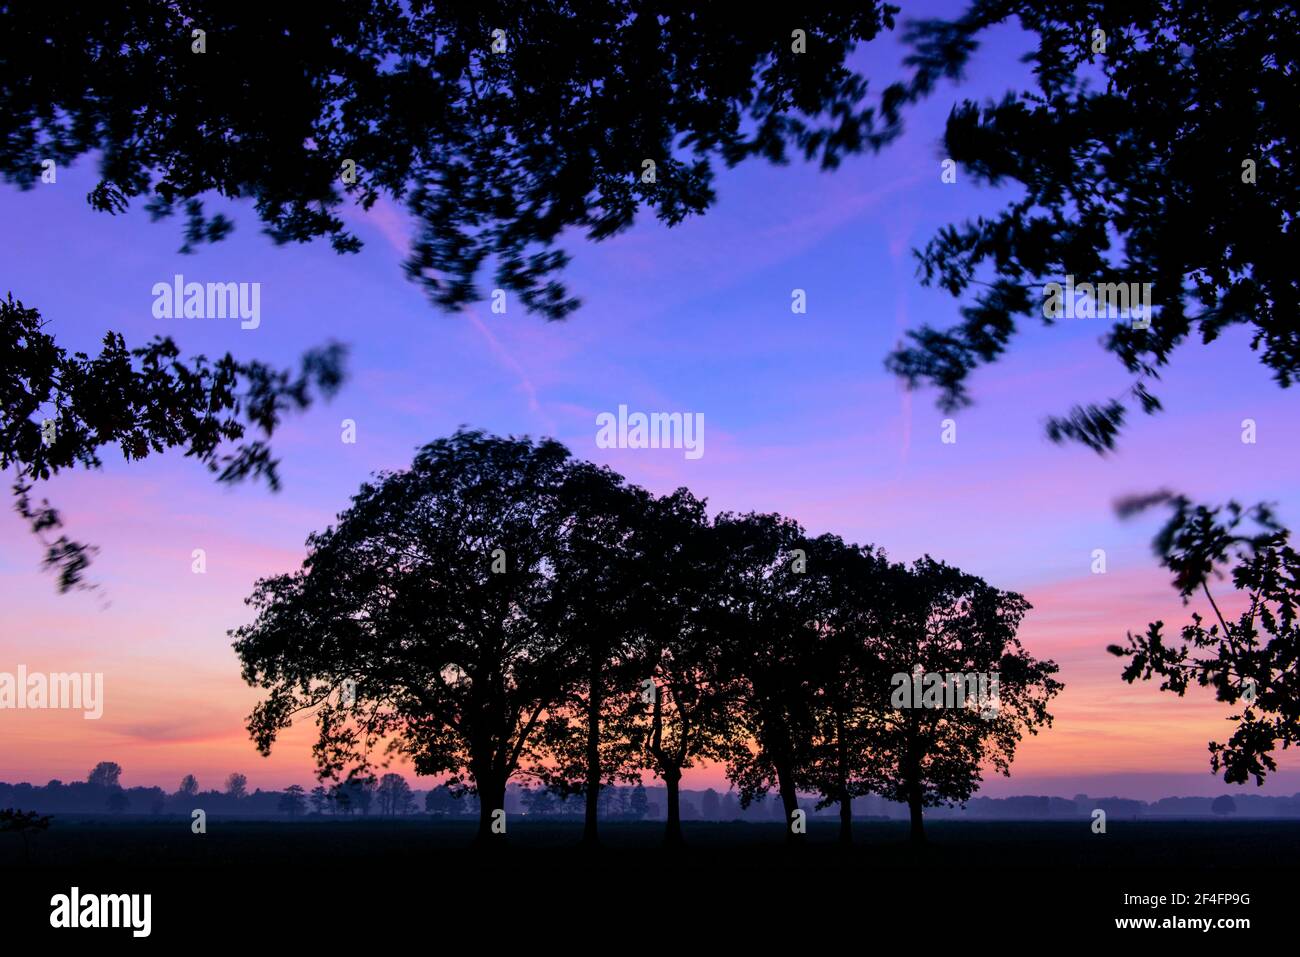 Group of trees at sunset, Boller Moor, Lower Saxony, Germany Stock Photo